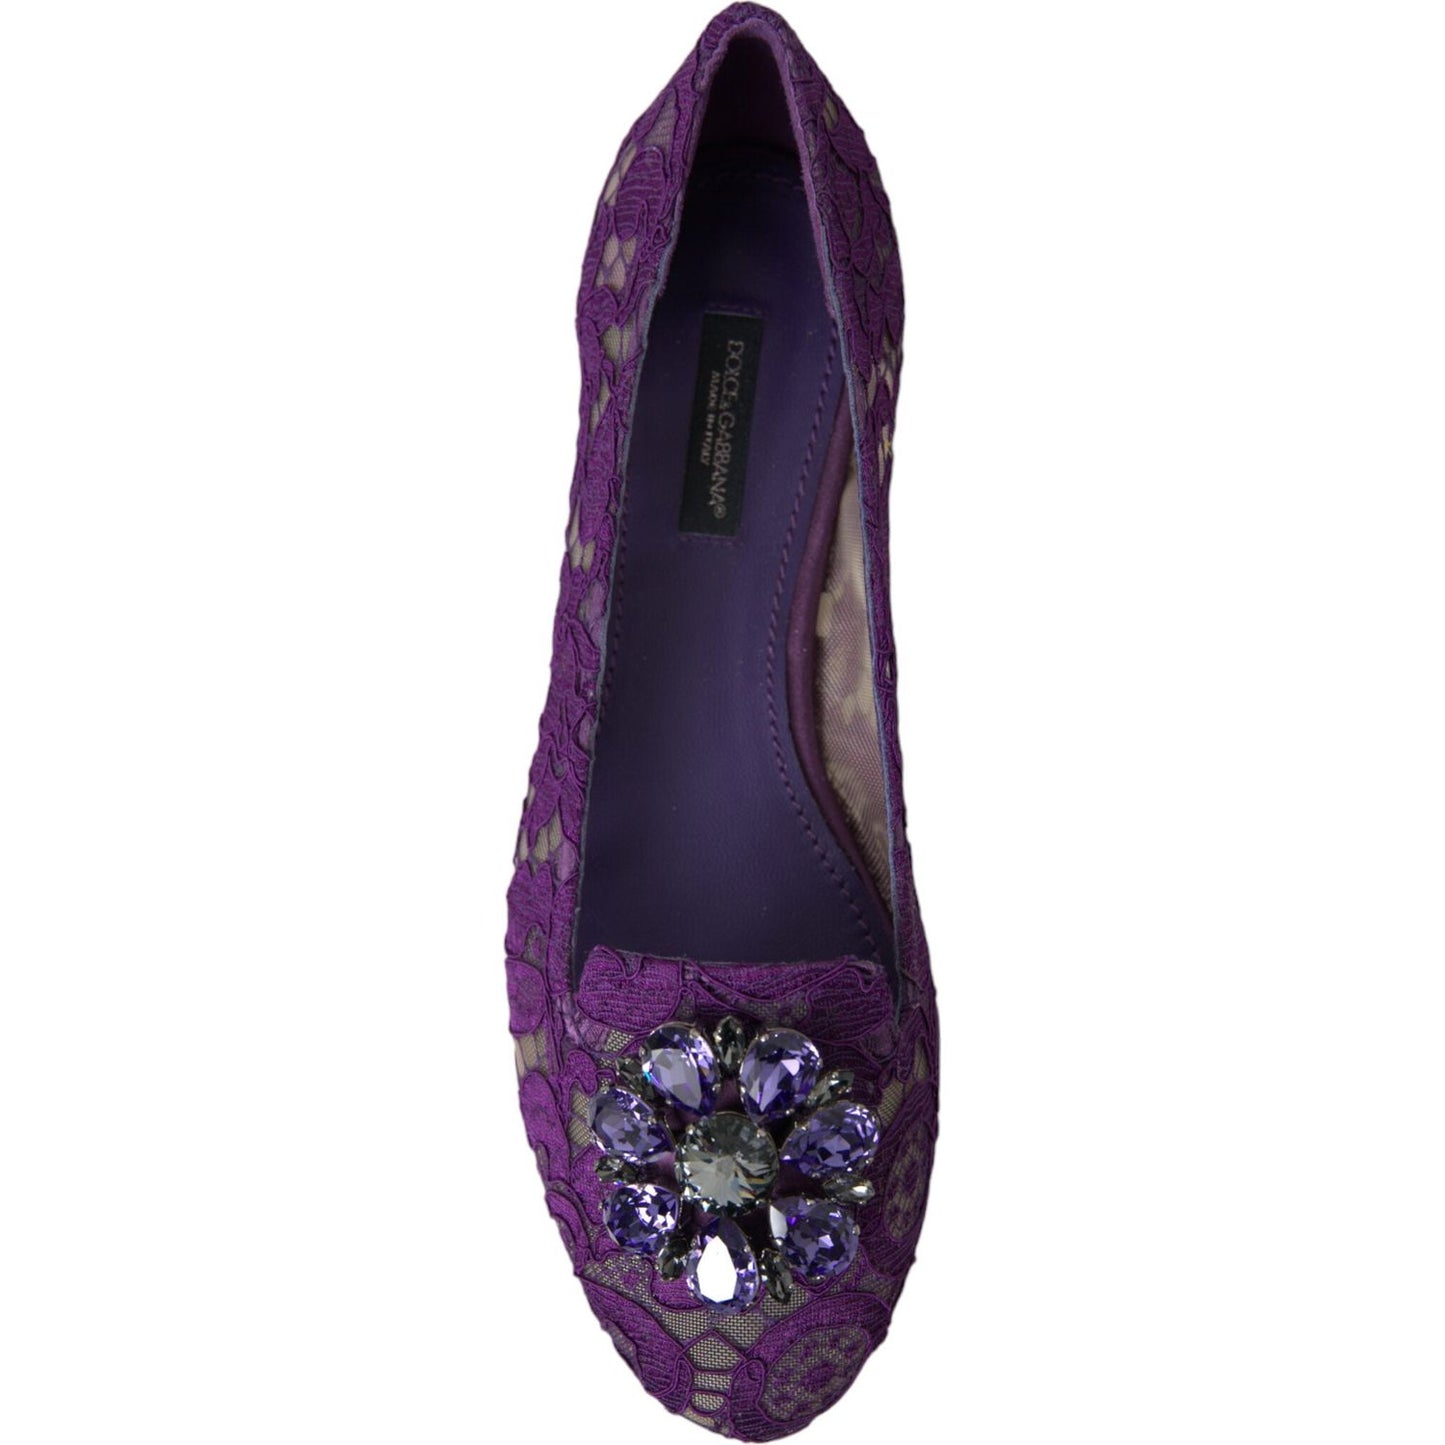 Dolce & Gabbana Elegant Floral Lace Vally Flat Shoes purple-vally-taormina-lace-crystals-flats-shoes 465A9047-bg-scaled-b67c7732-77e.jpg